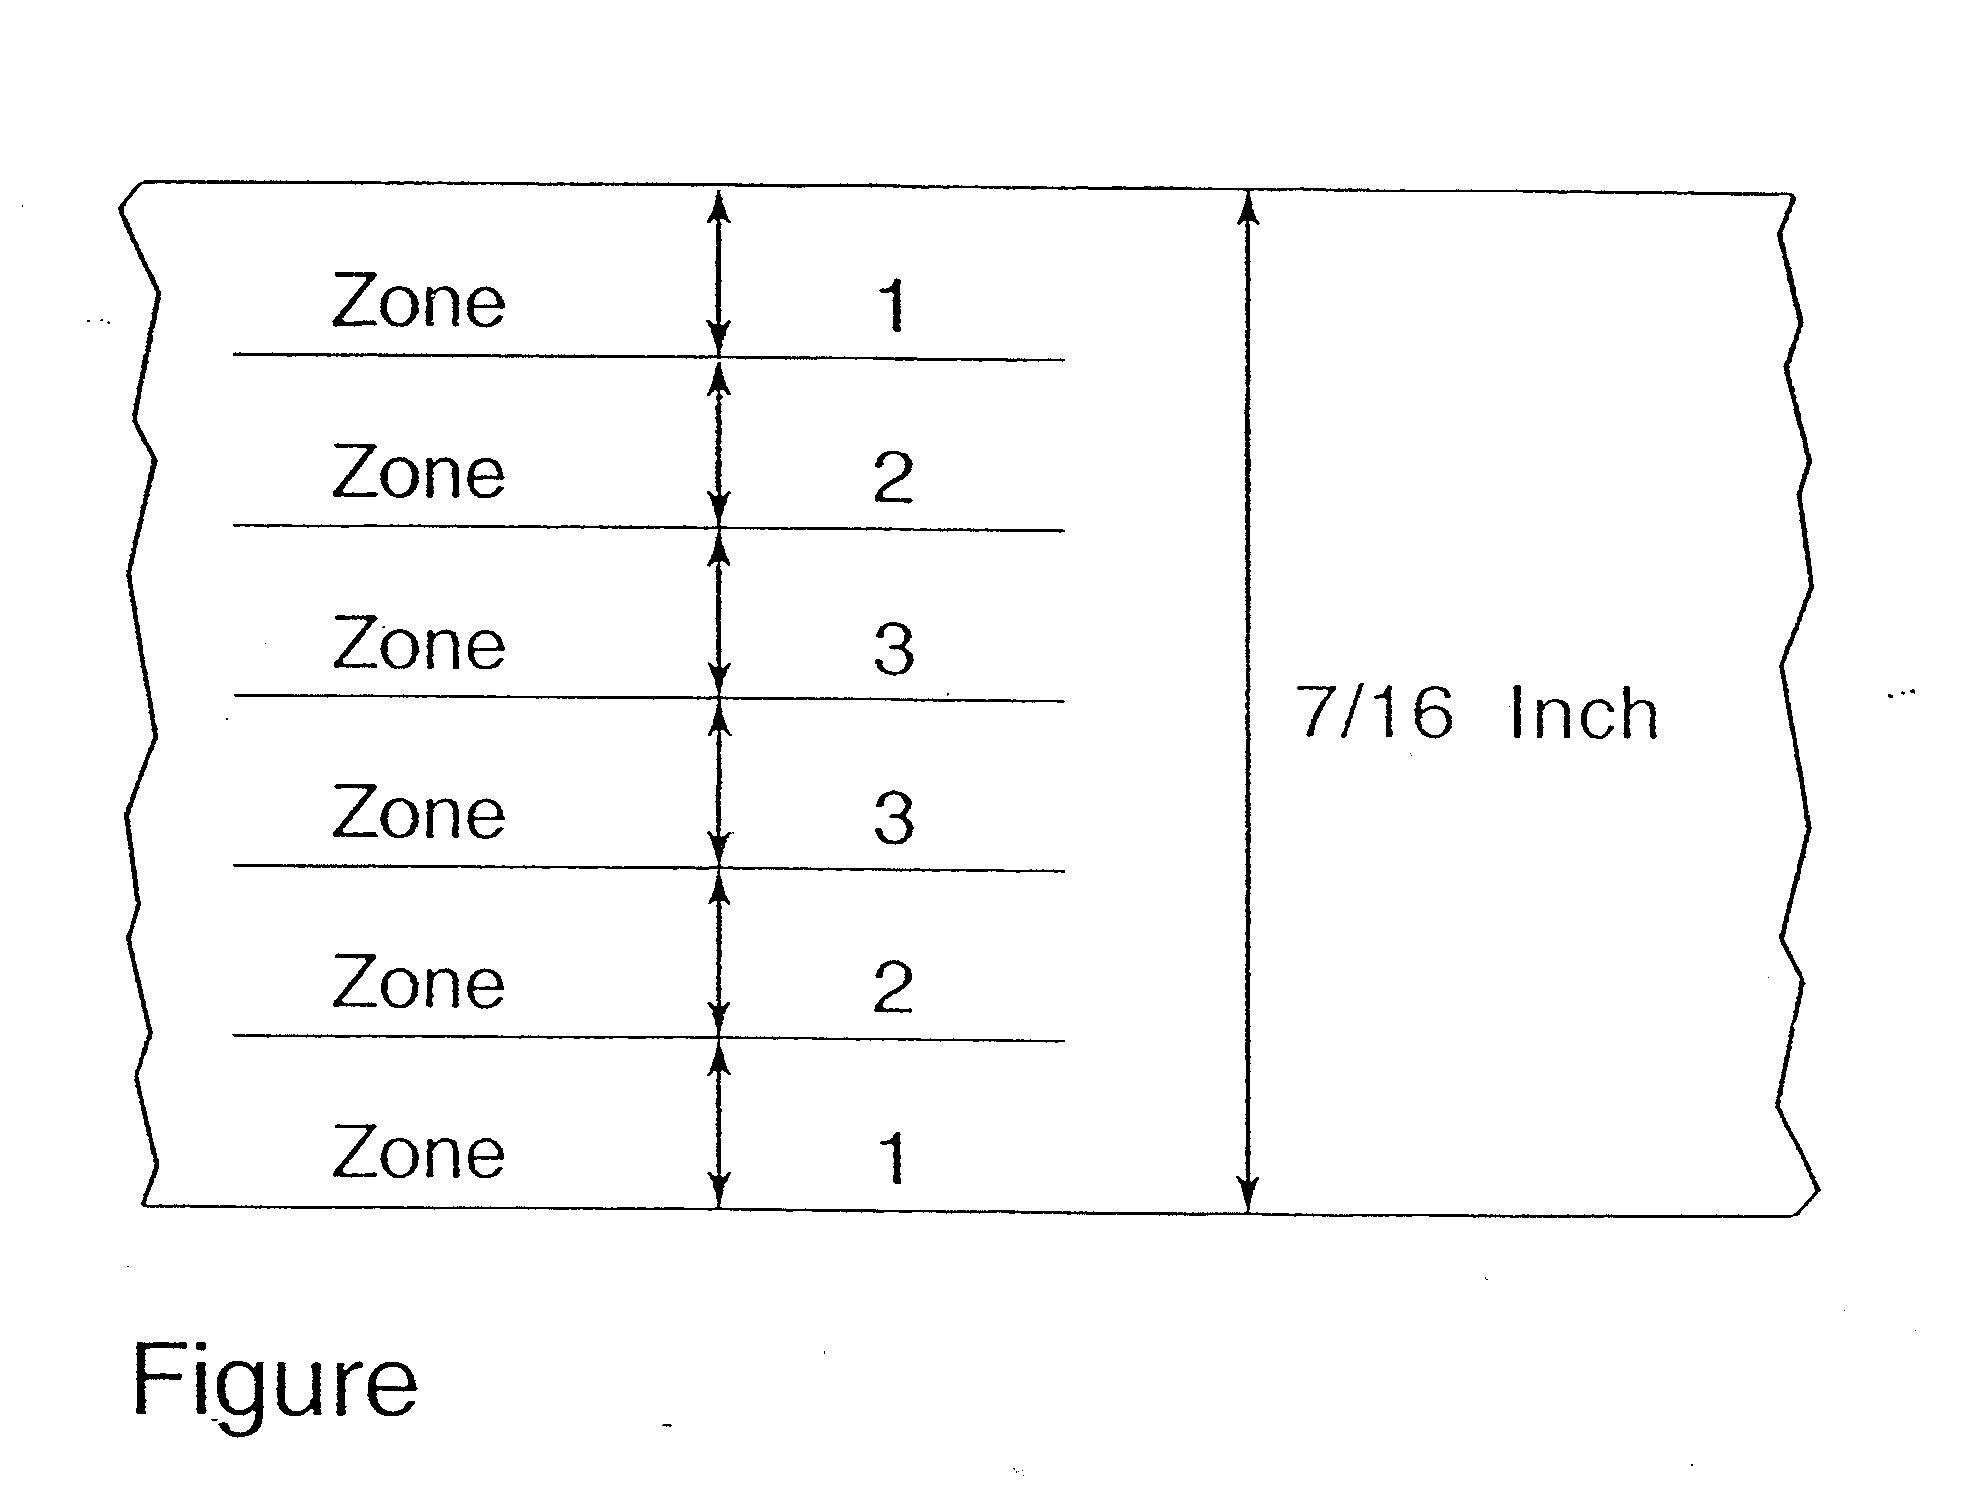 Method of employing enhanced penetration of wood preservatives to protect wood and a related solution